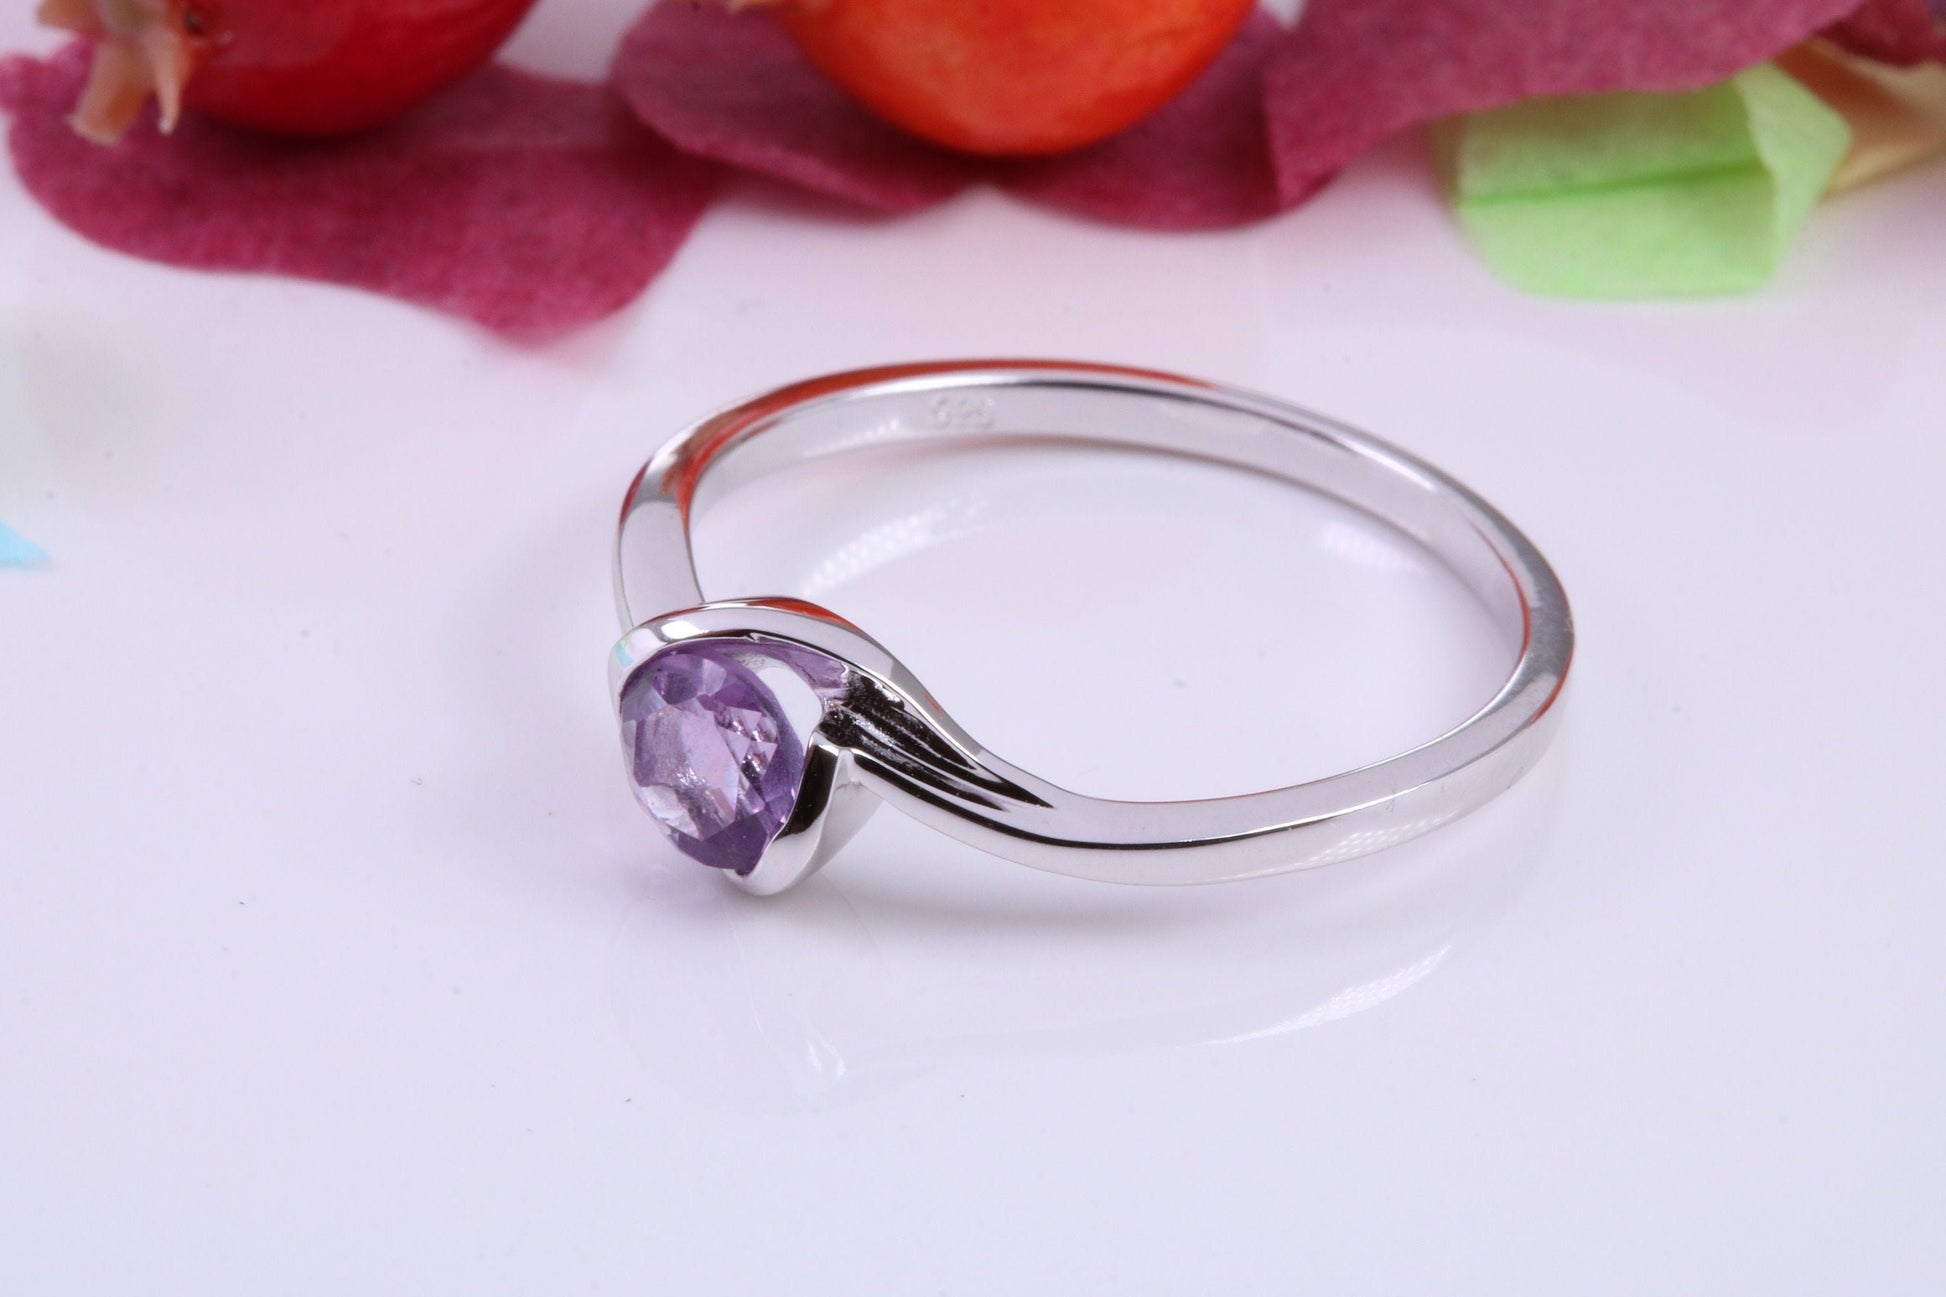 Natural Round cut Amethyst set Sterling Silver Ring, Very Smooth Setting, February Birthstone